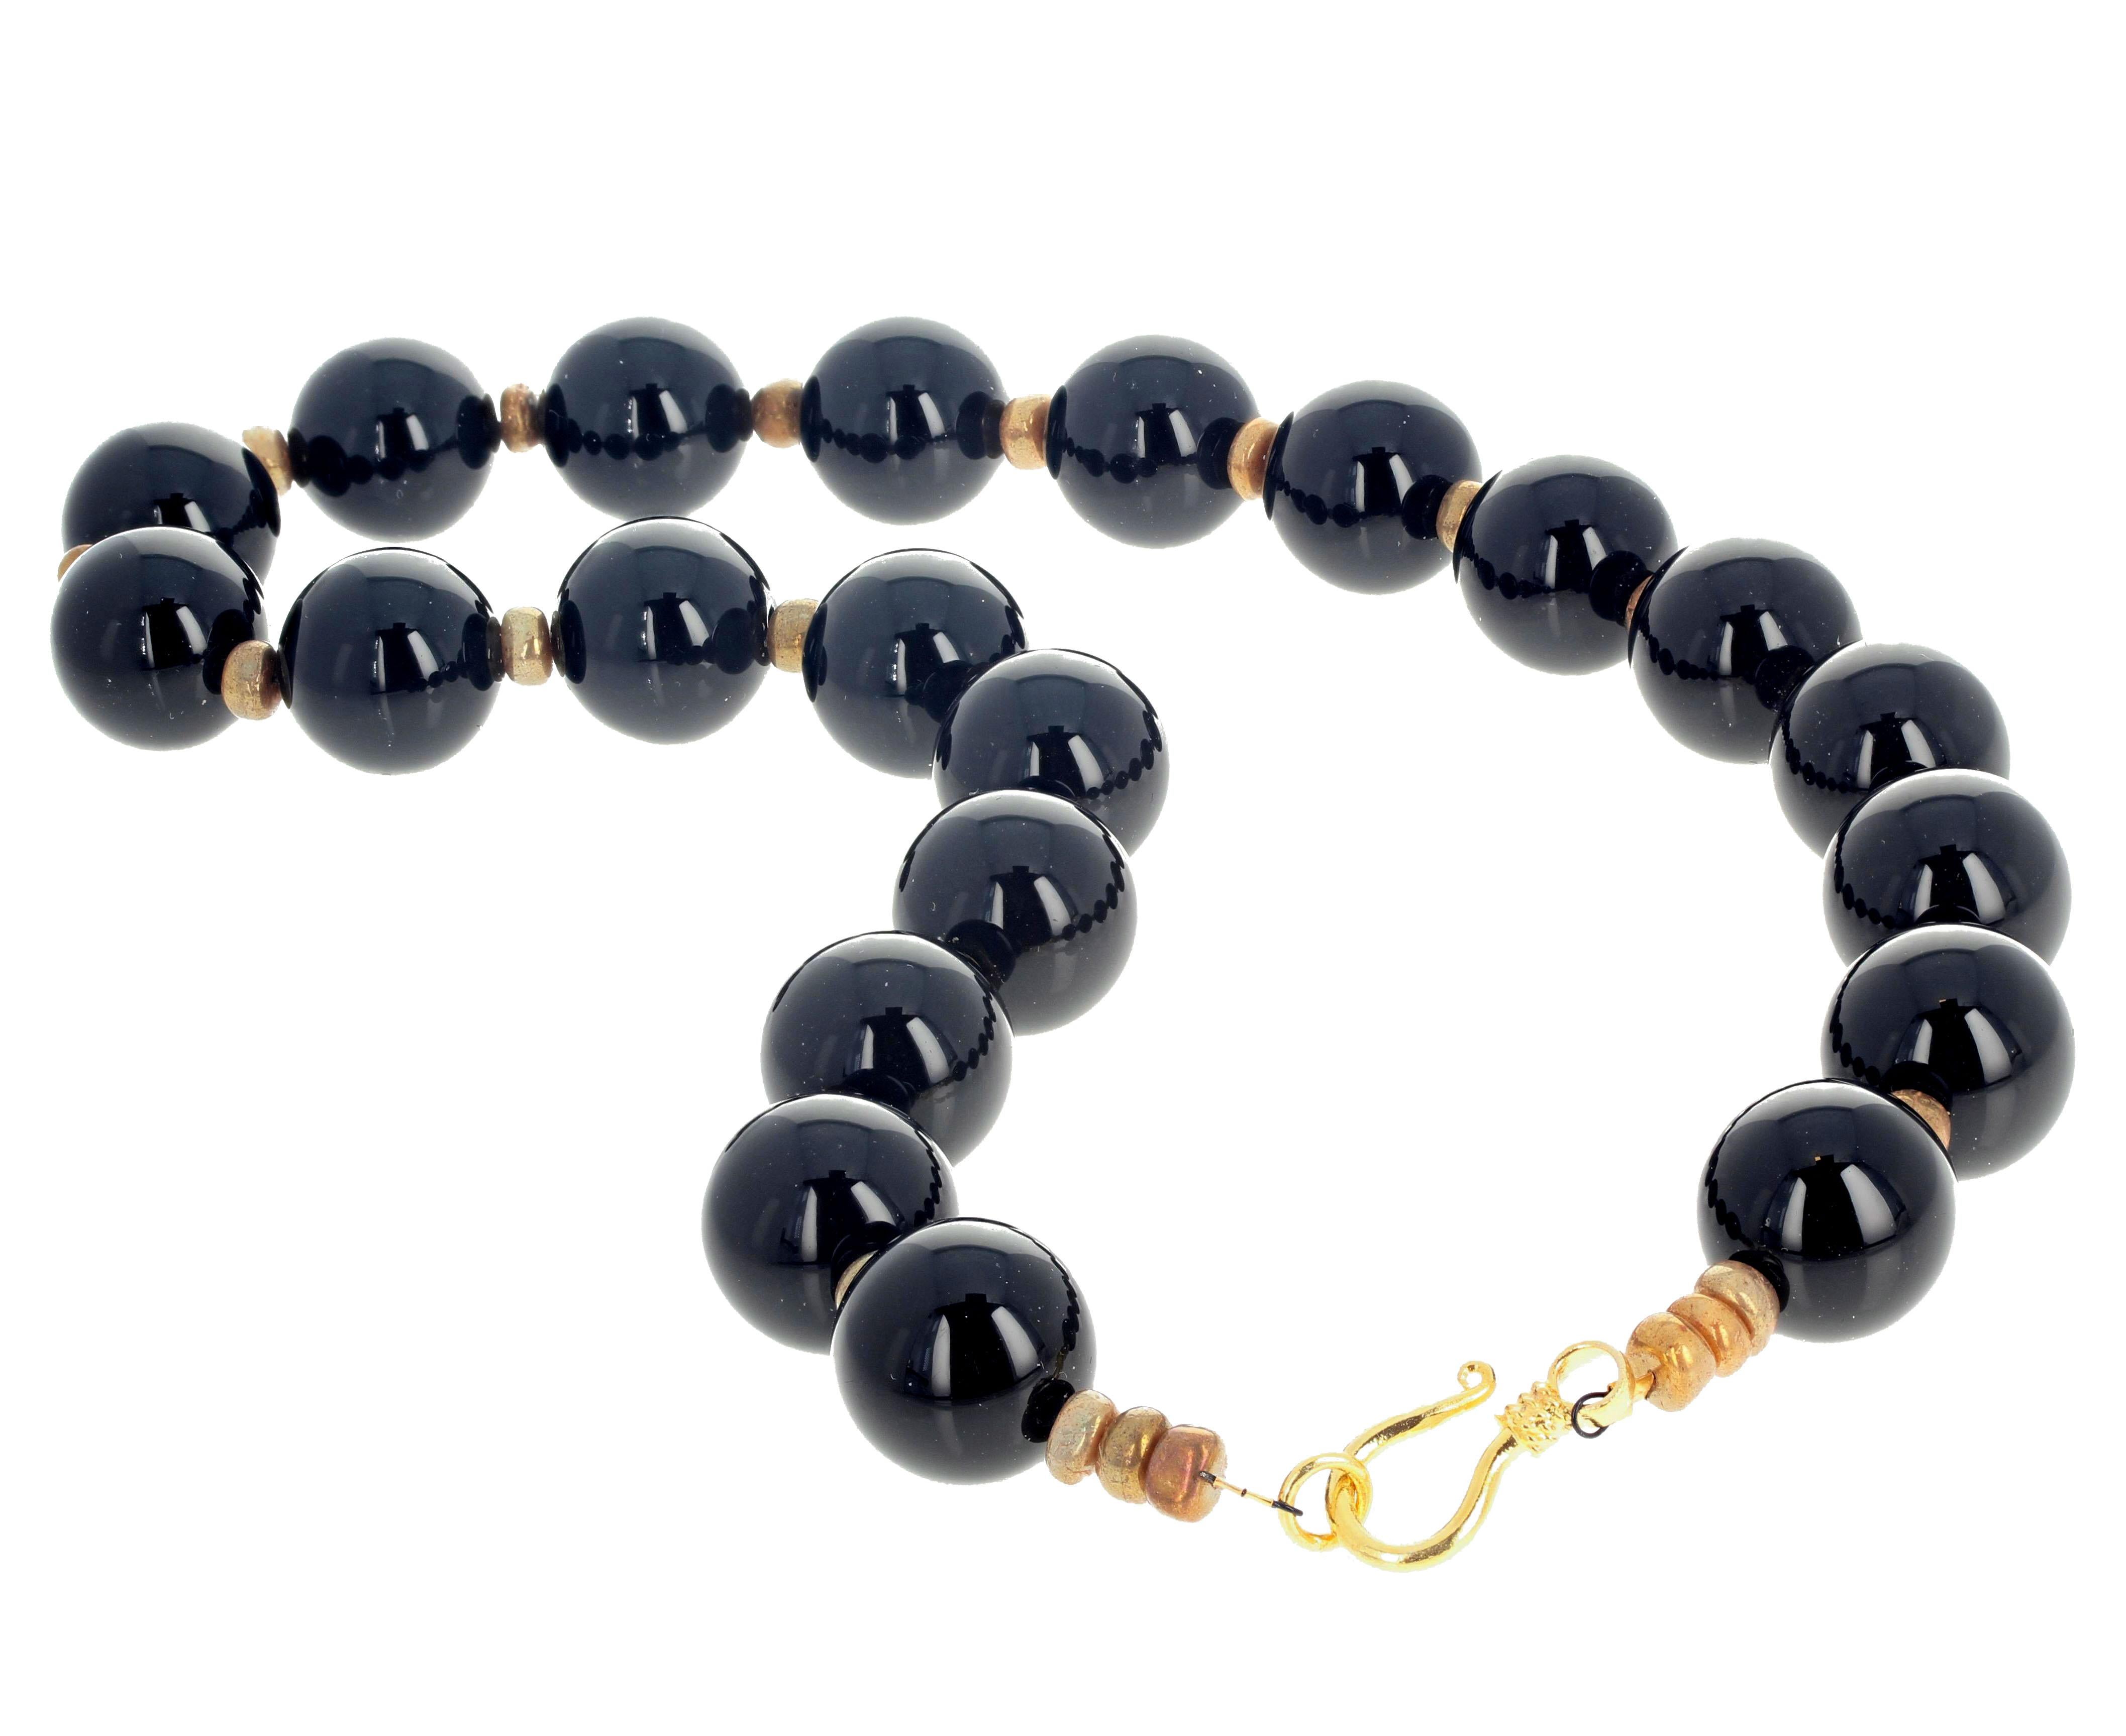 These highly polished glowing natural Black Onyx are enhanced with rounded polished glowing golden Coral rondels set in this gorgeous necklace 19.75 inches long with an easy to use gold plated hook clasp.  The Onyx are 18mm.  